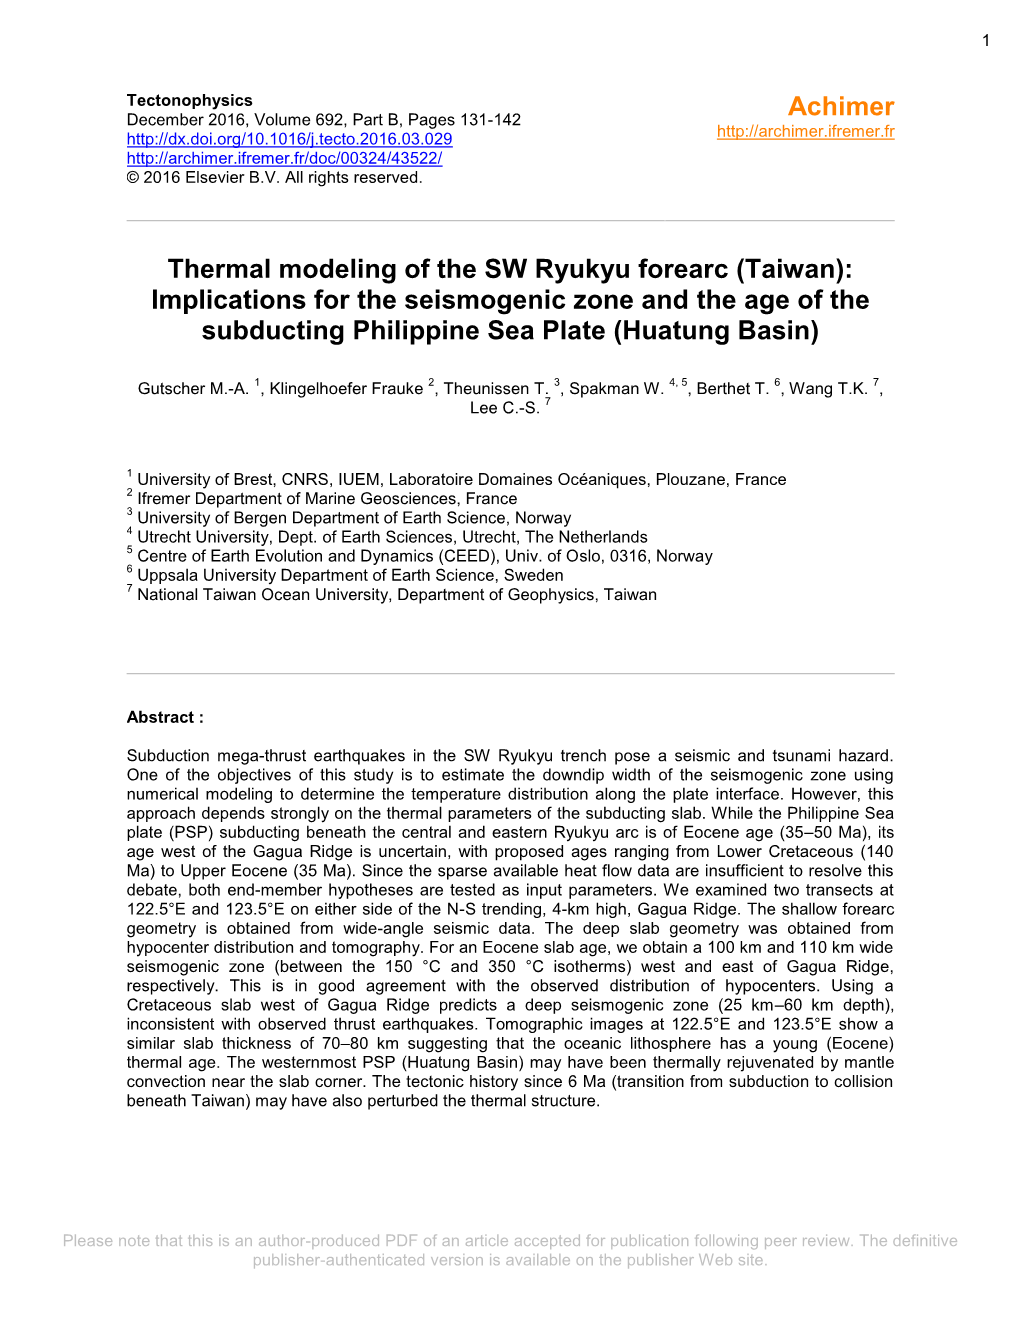 Thermal Modeling of the SW Ryukyu Forearc (Taiwan): Implications for the Seismogenic Zone and the Age of the Subducting Philippine Sea Plate (Huatung Basin)